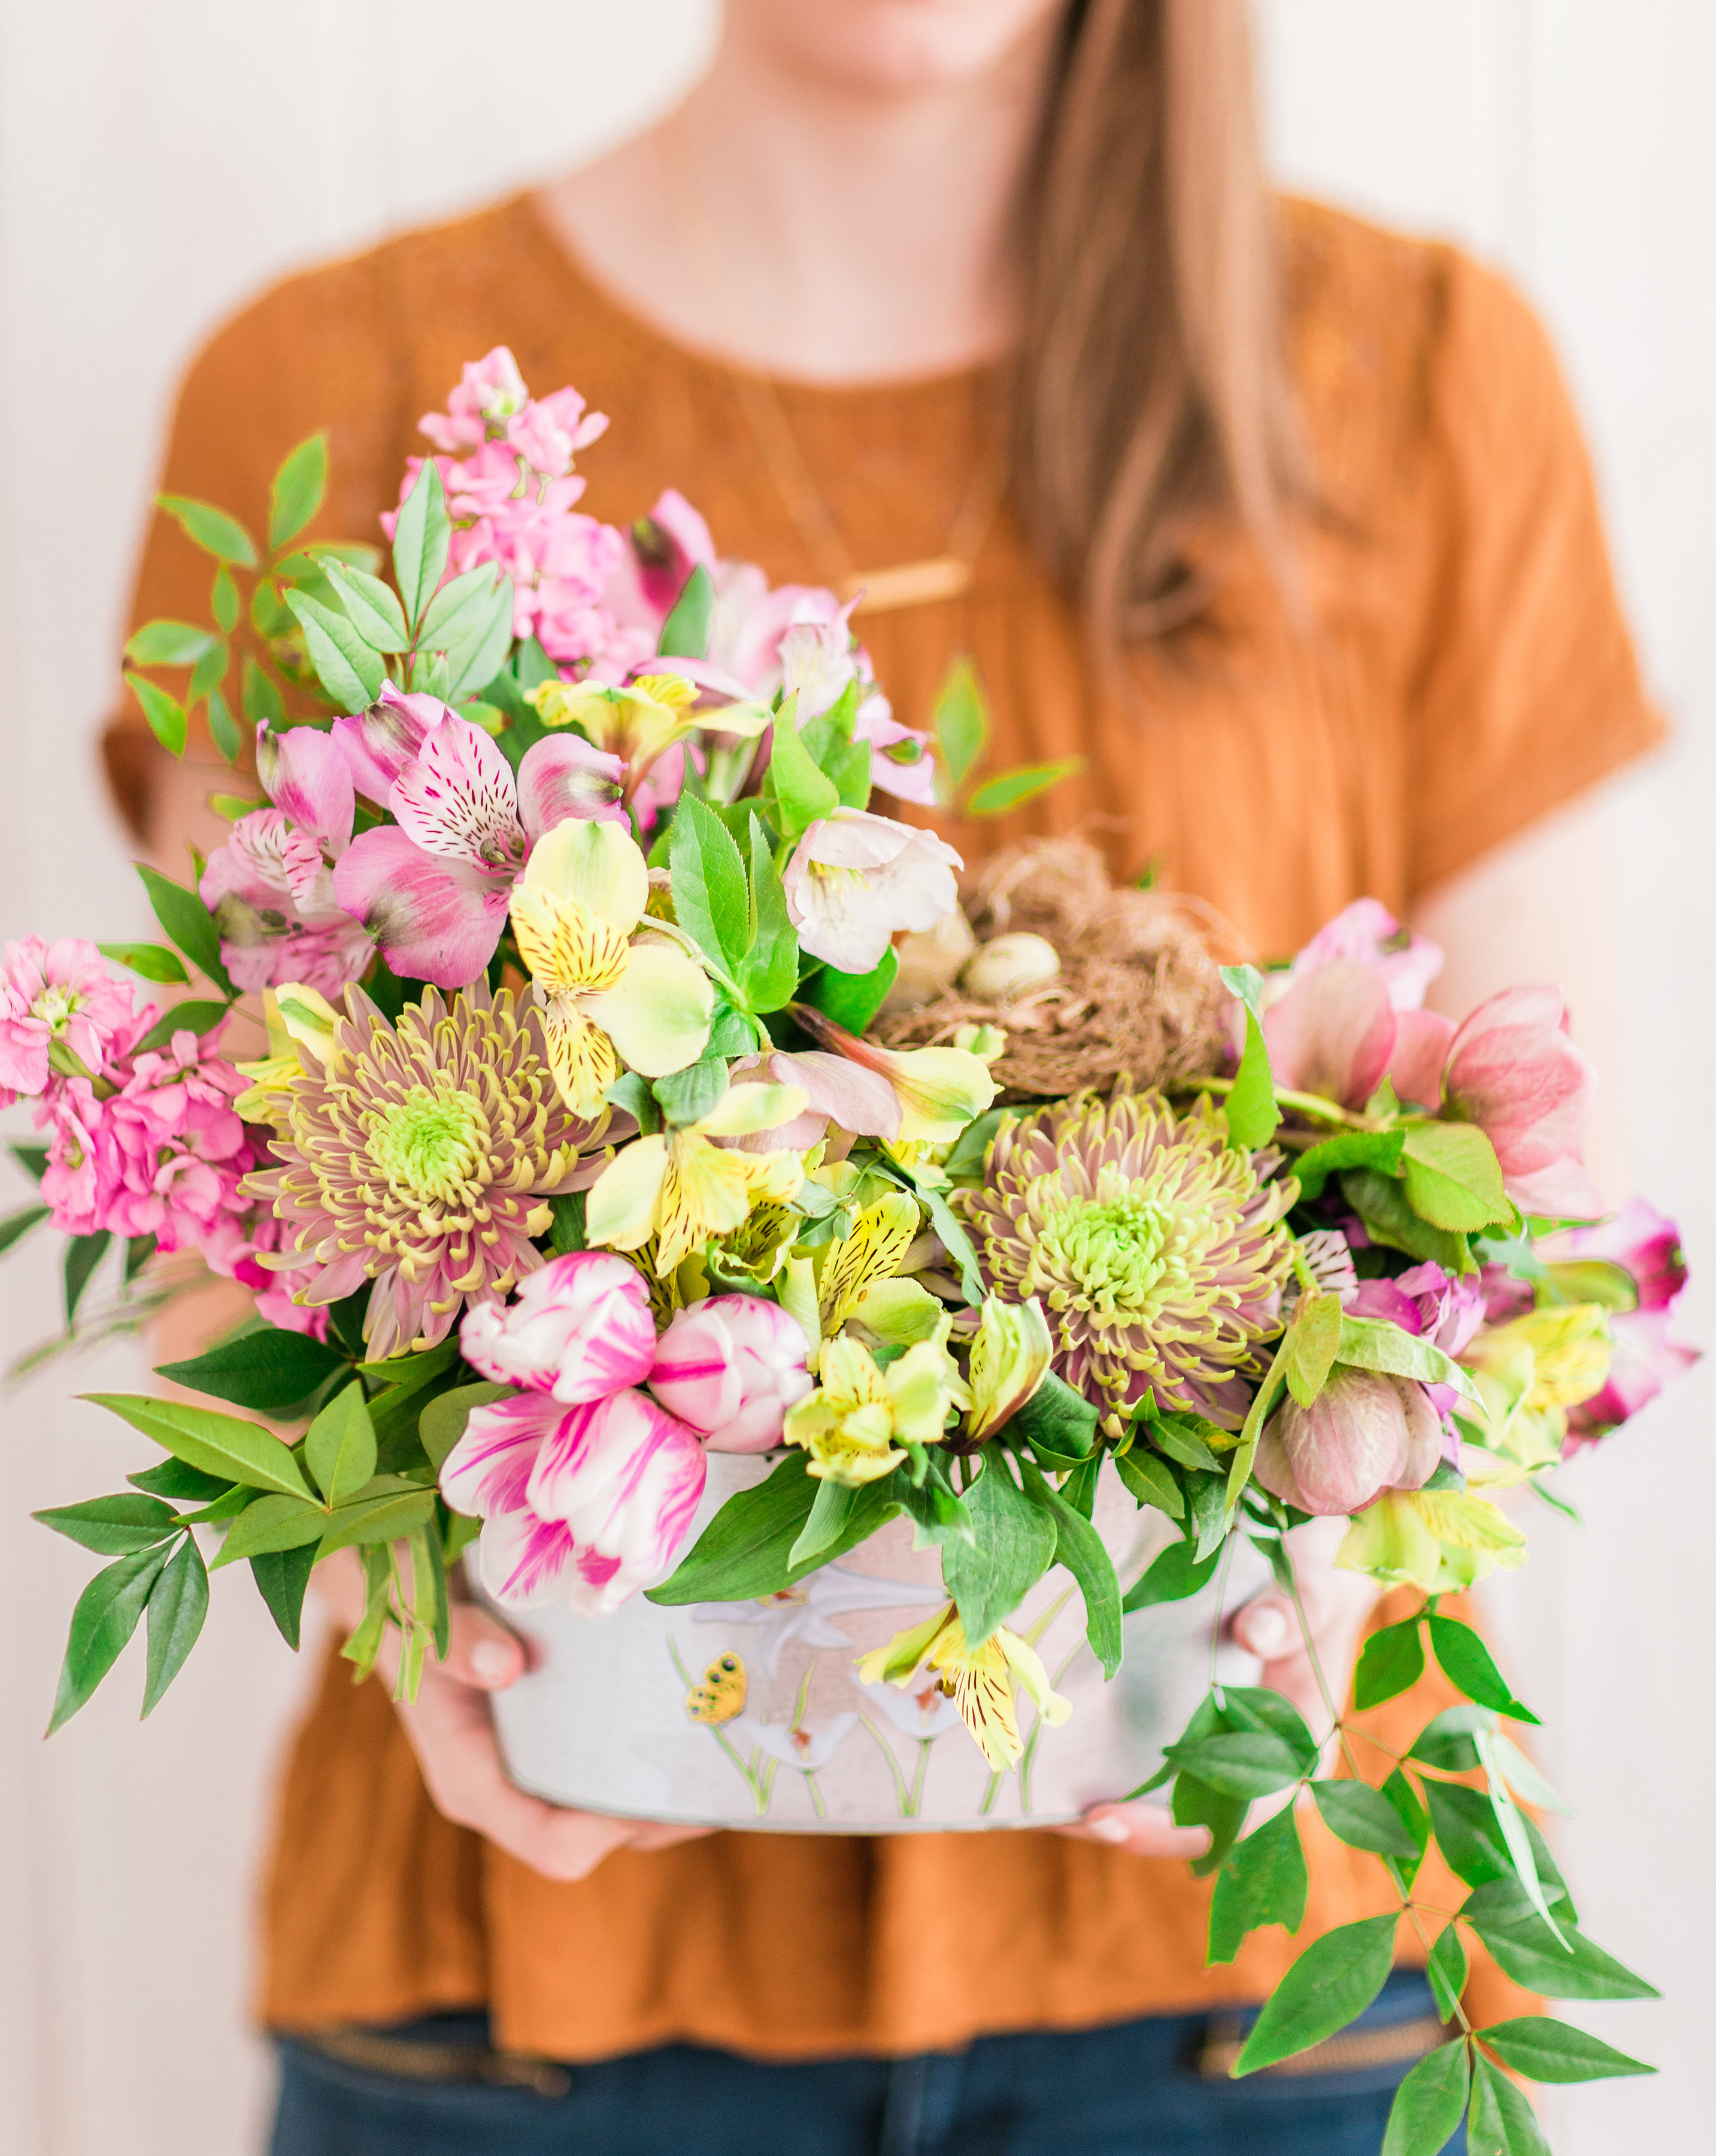 Want to put together a stunning floral arrangement with that bunch of flowers you just picked up from the grocery store or farmers market? We teamed up with a florist to teach you the easy step-by-step way to make beautiful arrangements at home. | glitterinc.com | @glitterinc